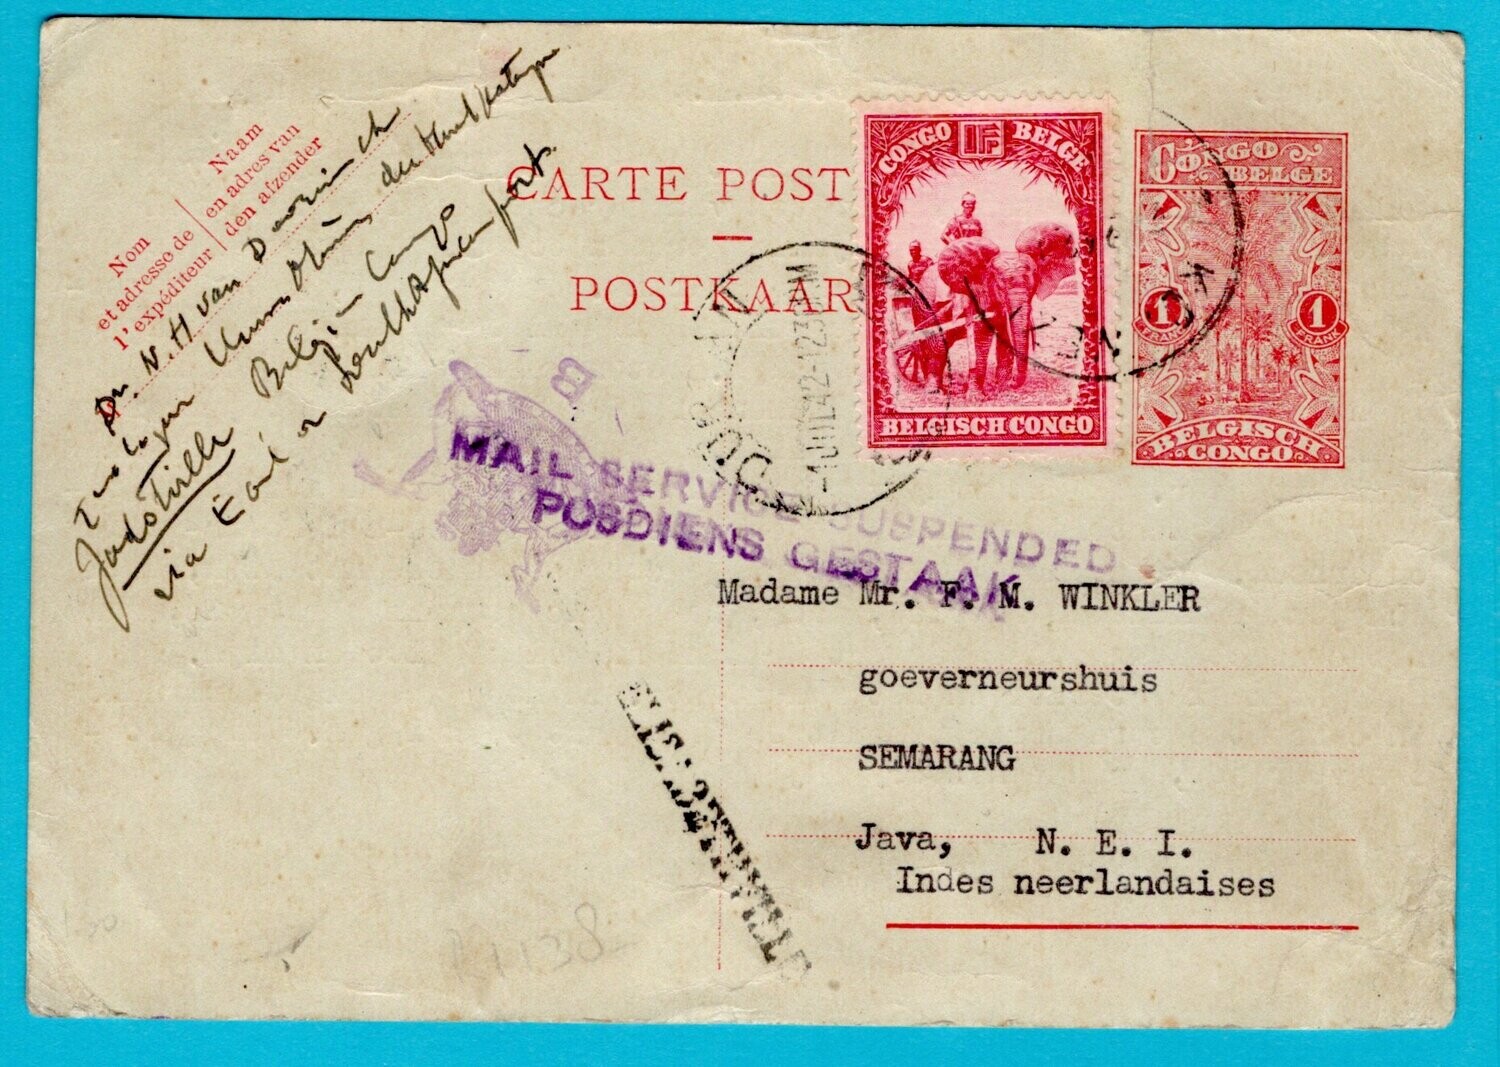 BELGIAN CONGO postal card 1942 to D.E. Indies service suspended